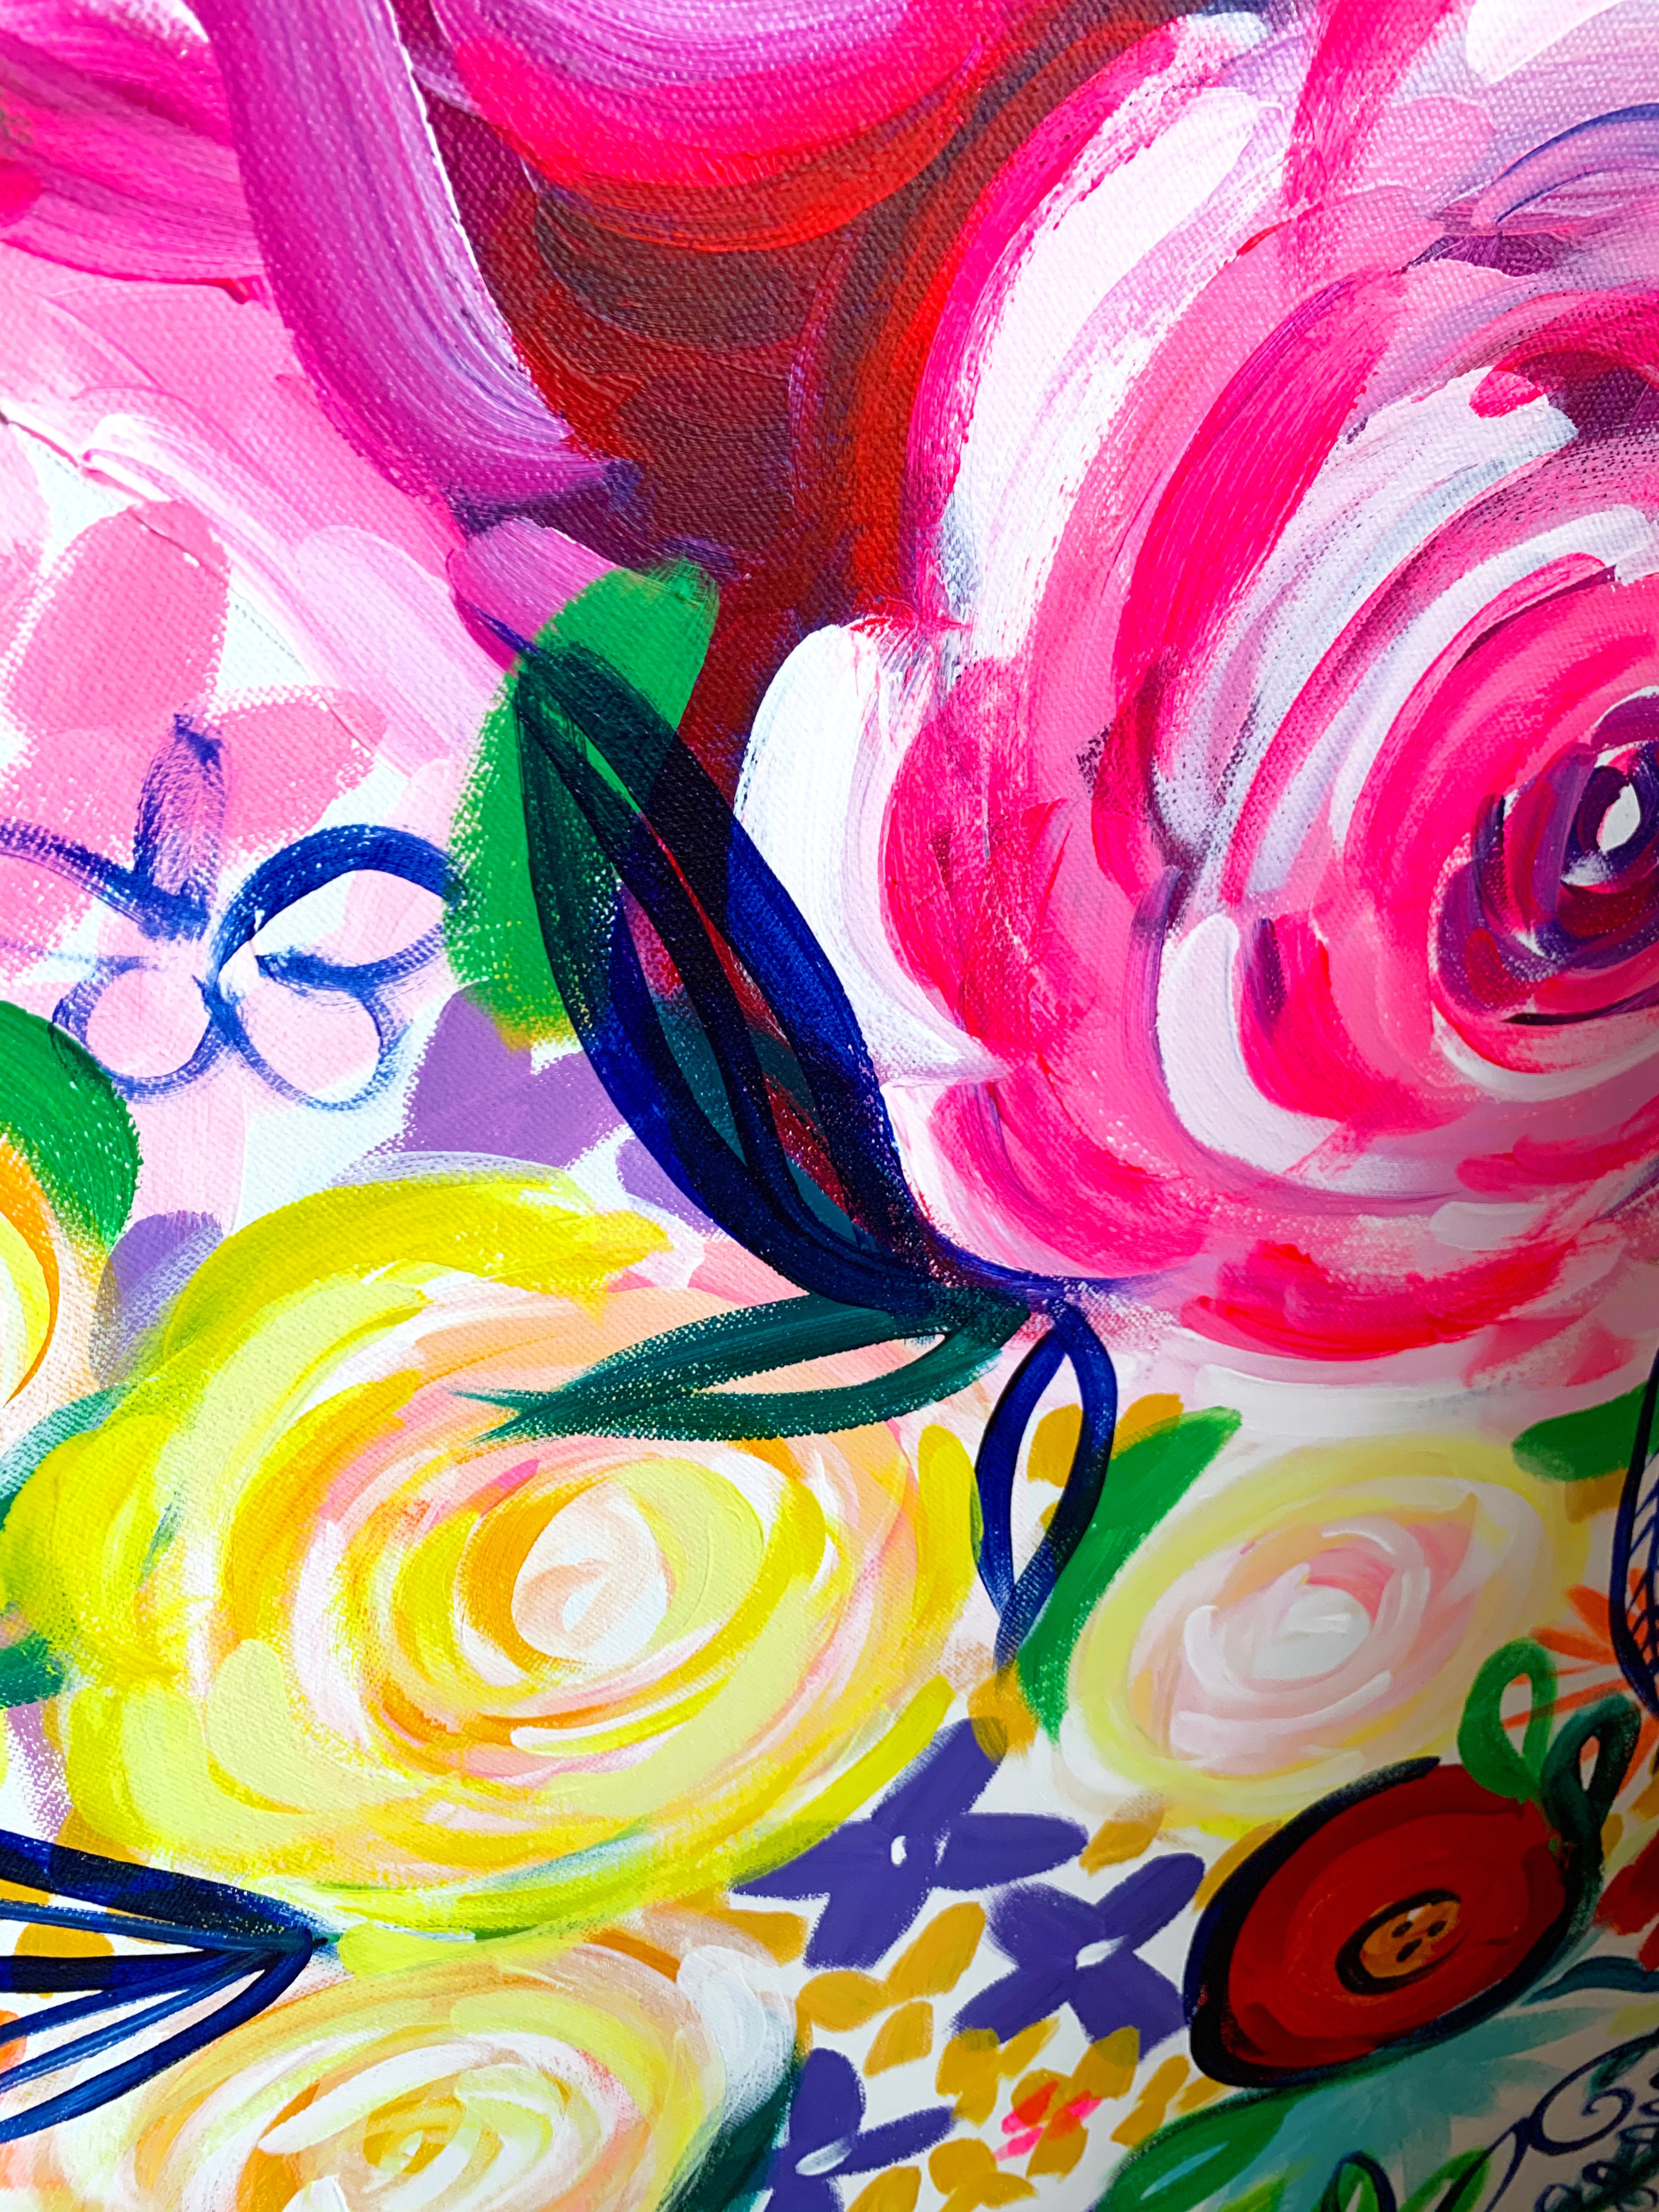 Vibrant Floral Painting on Canvas